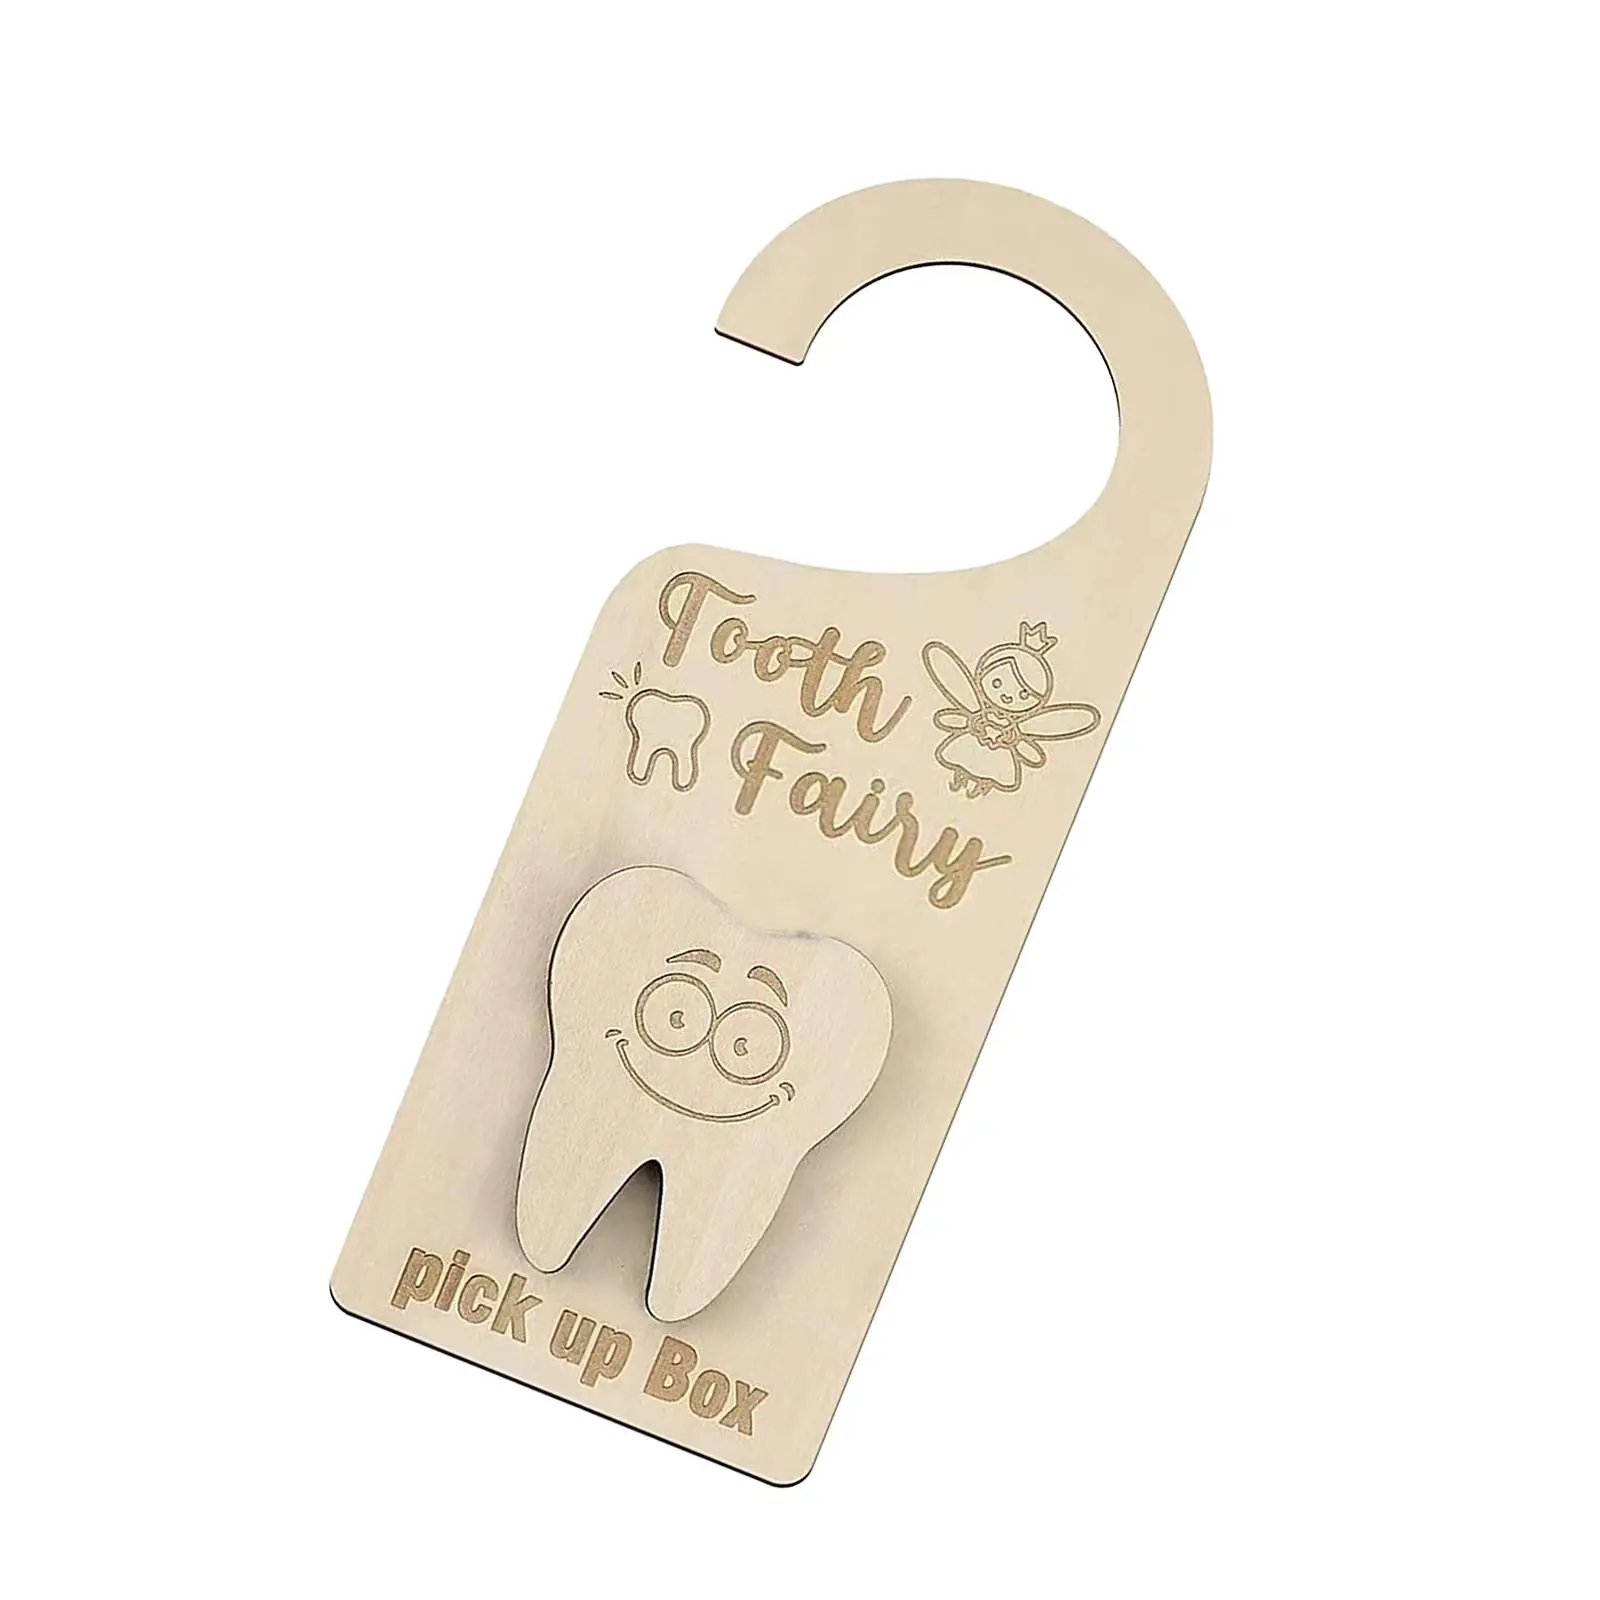 Wooden Tooth Fairy Door Hanger Encourage Gift Room Decor Tooth Fairy Pick up Box for Lost Teeth Kids Toddlers Boys Girls